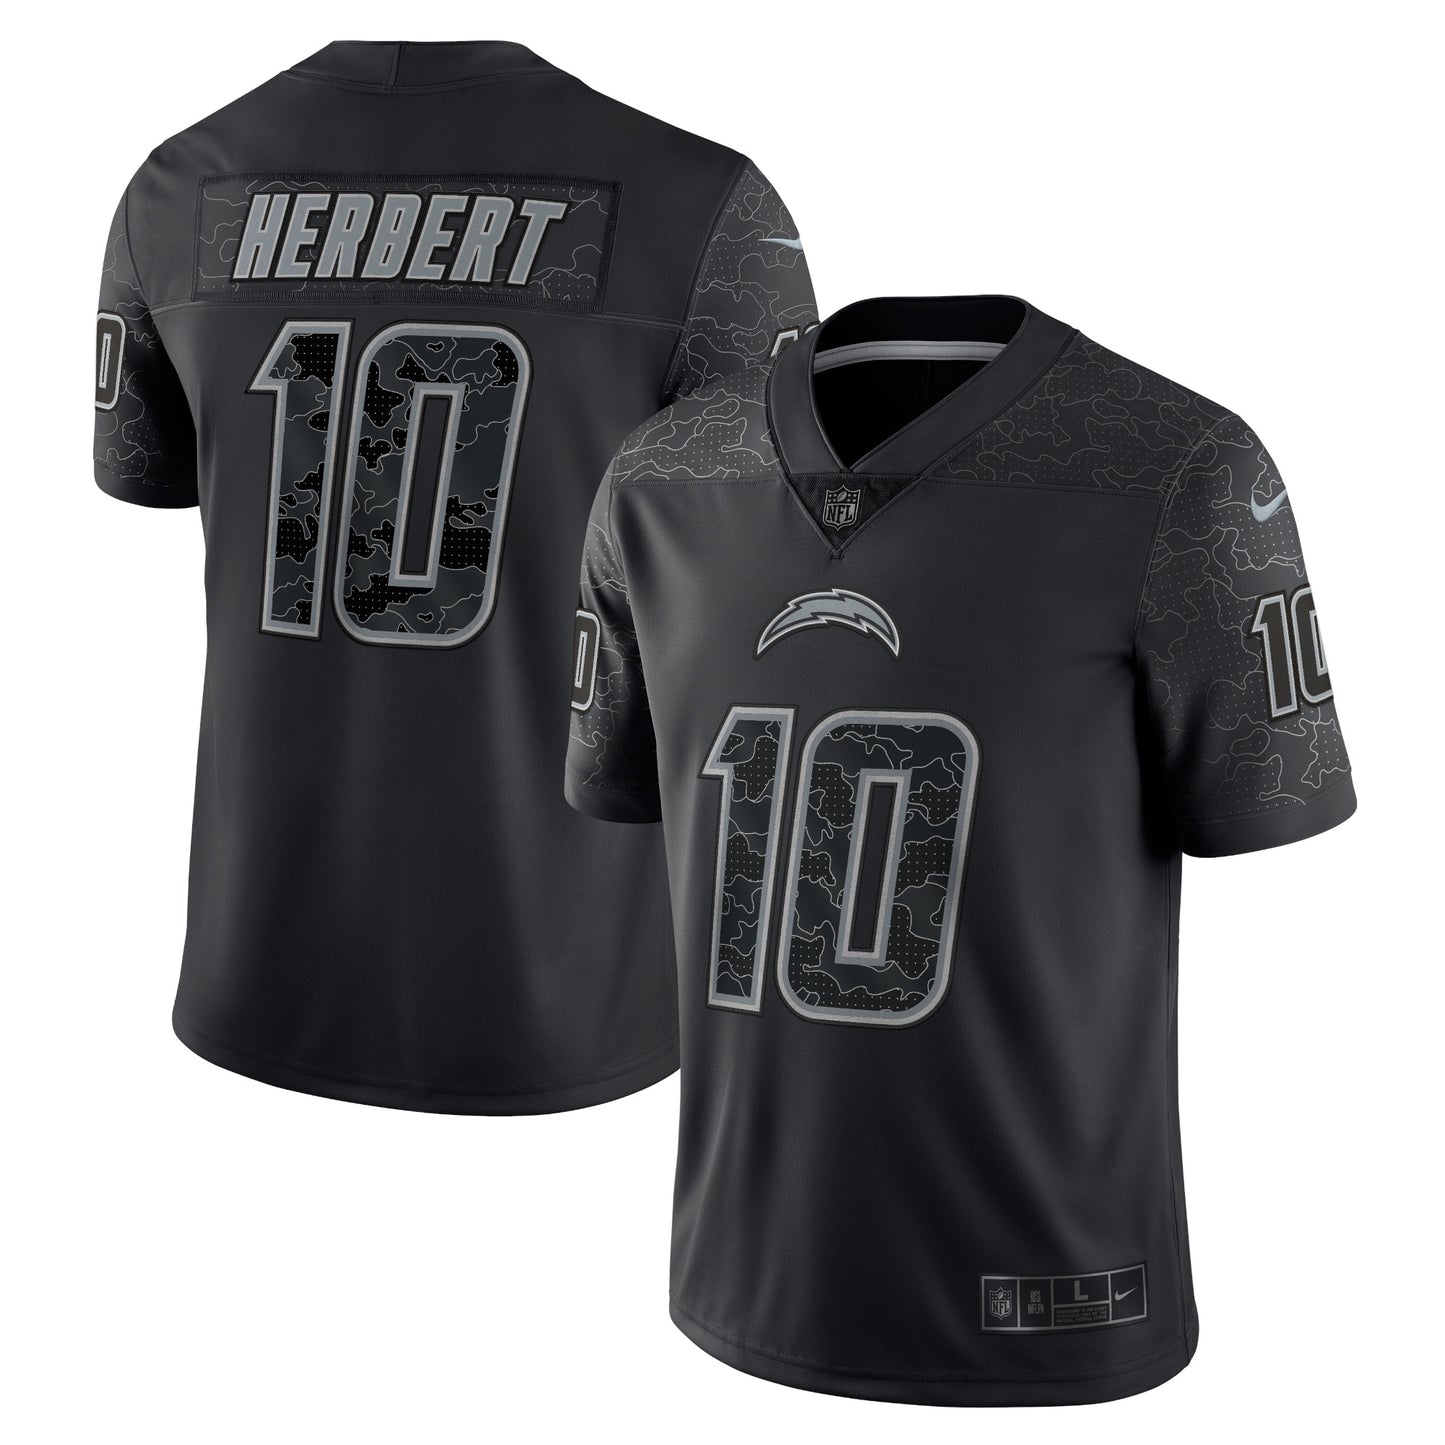 Justin Herbert Los Angeles Chargers Nike RFLCTV Limited Jersey - Black